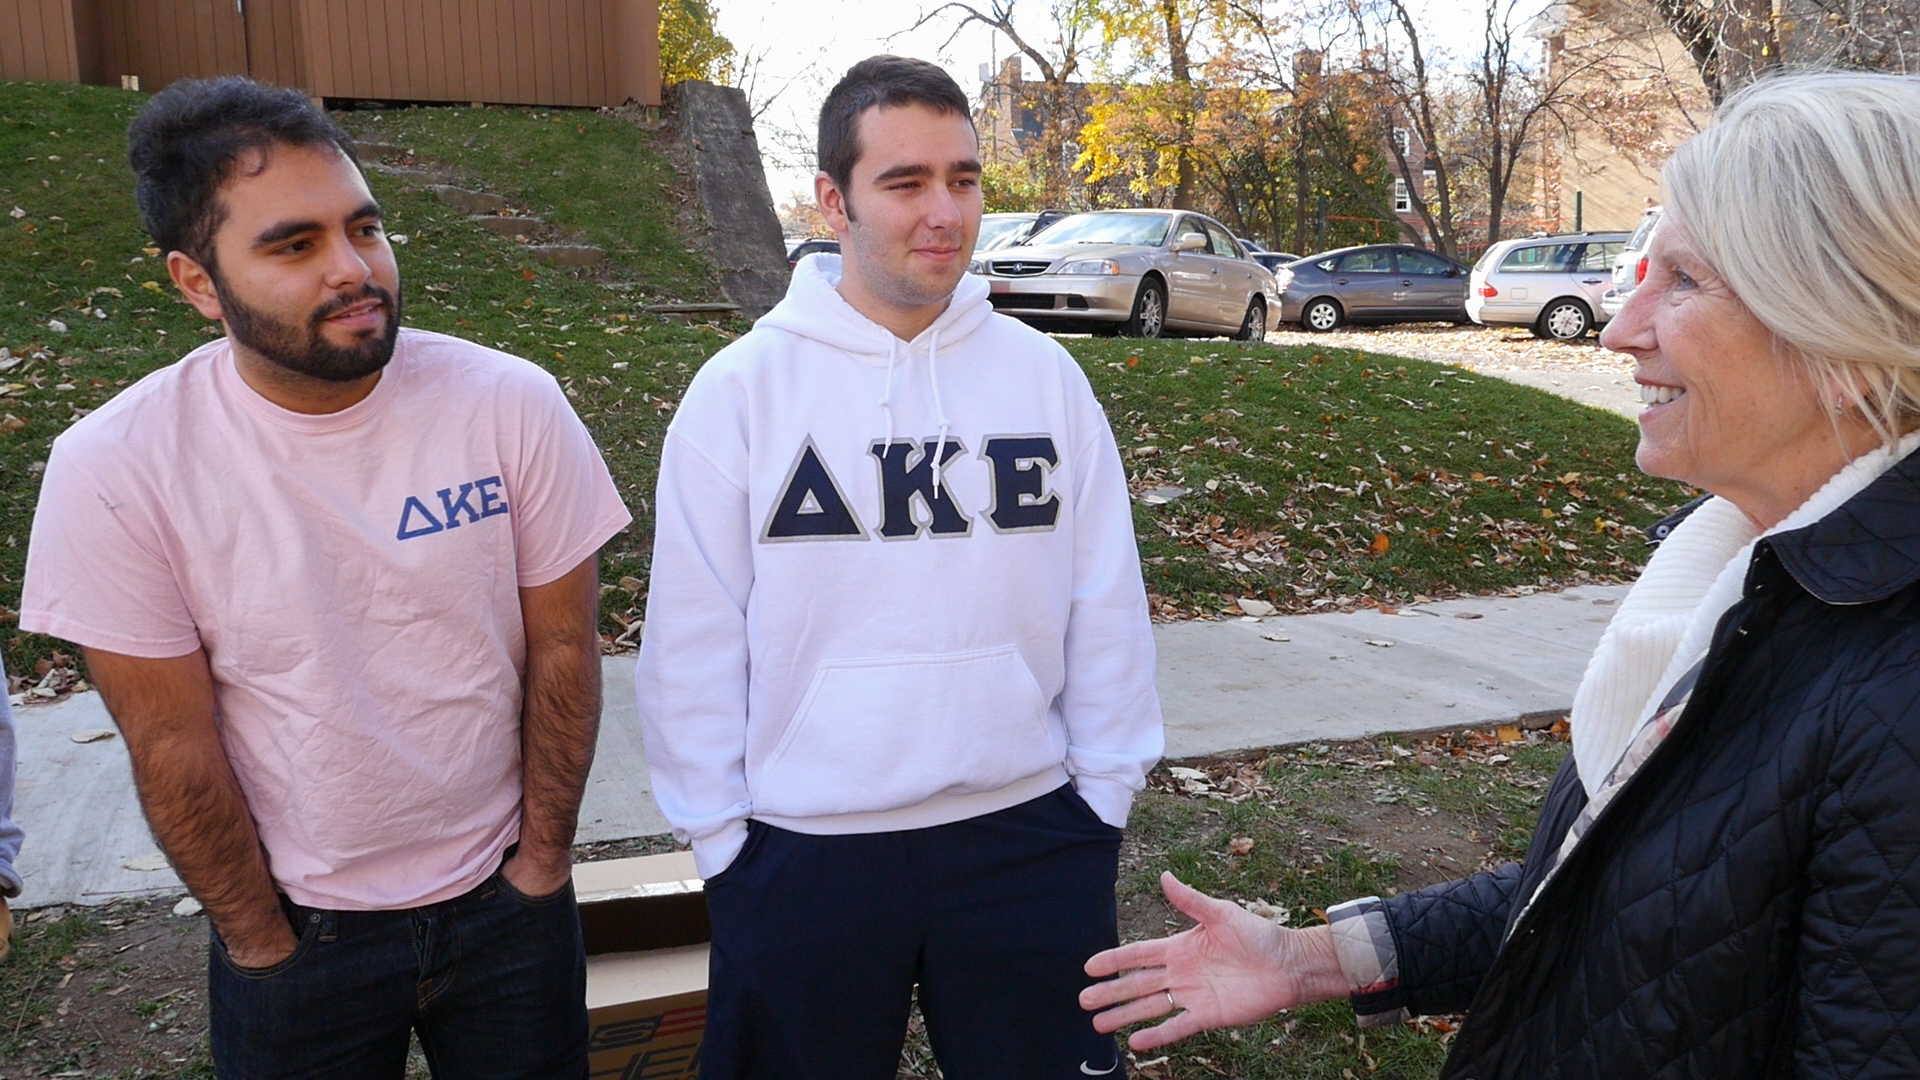 Peg Hambrick extends her hand to greet two fraternity members in her neighborhood